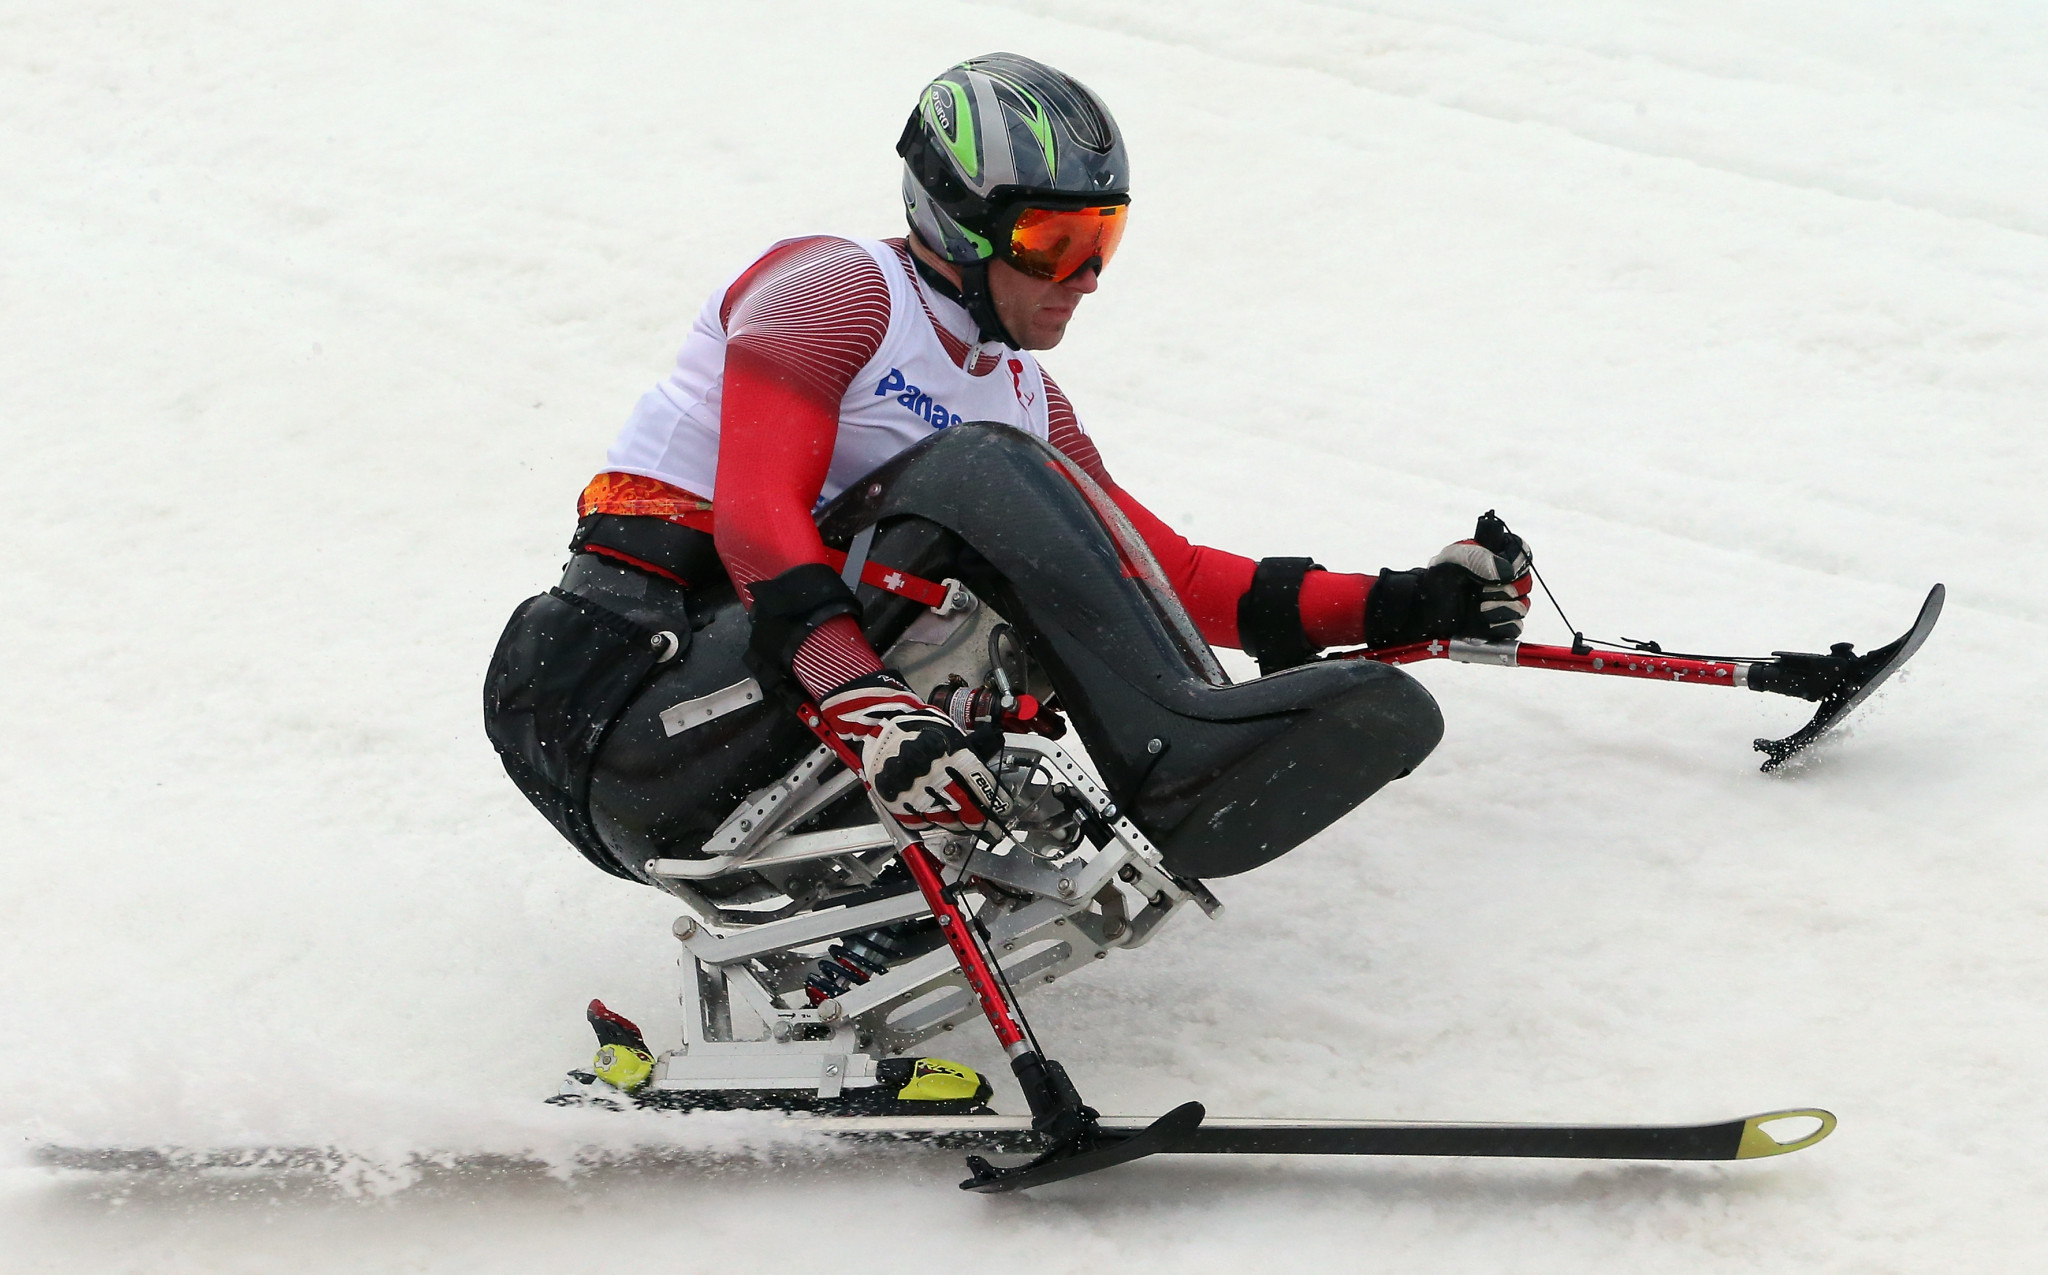 World Para Alpine Skiing Europa Cup winners crowned after final day cancelled